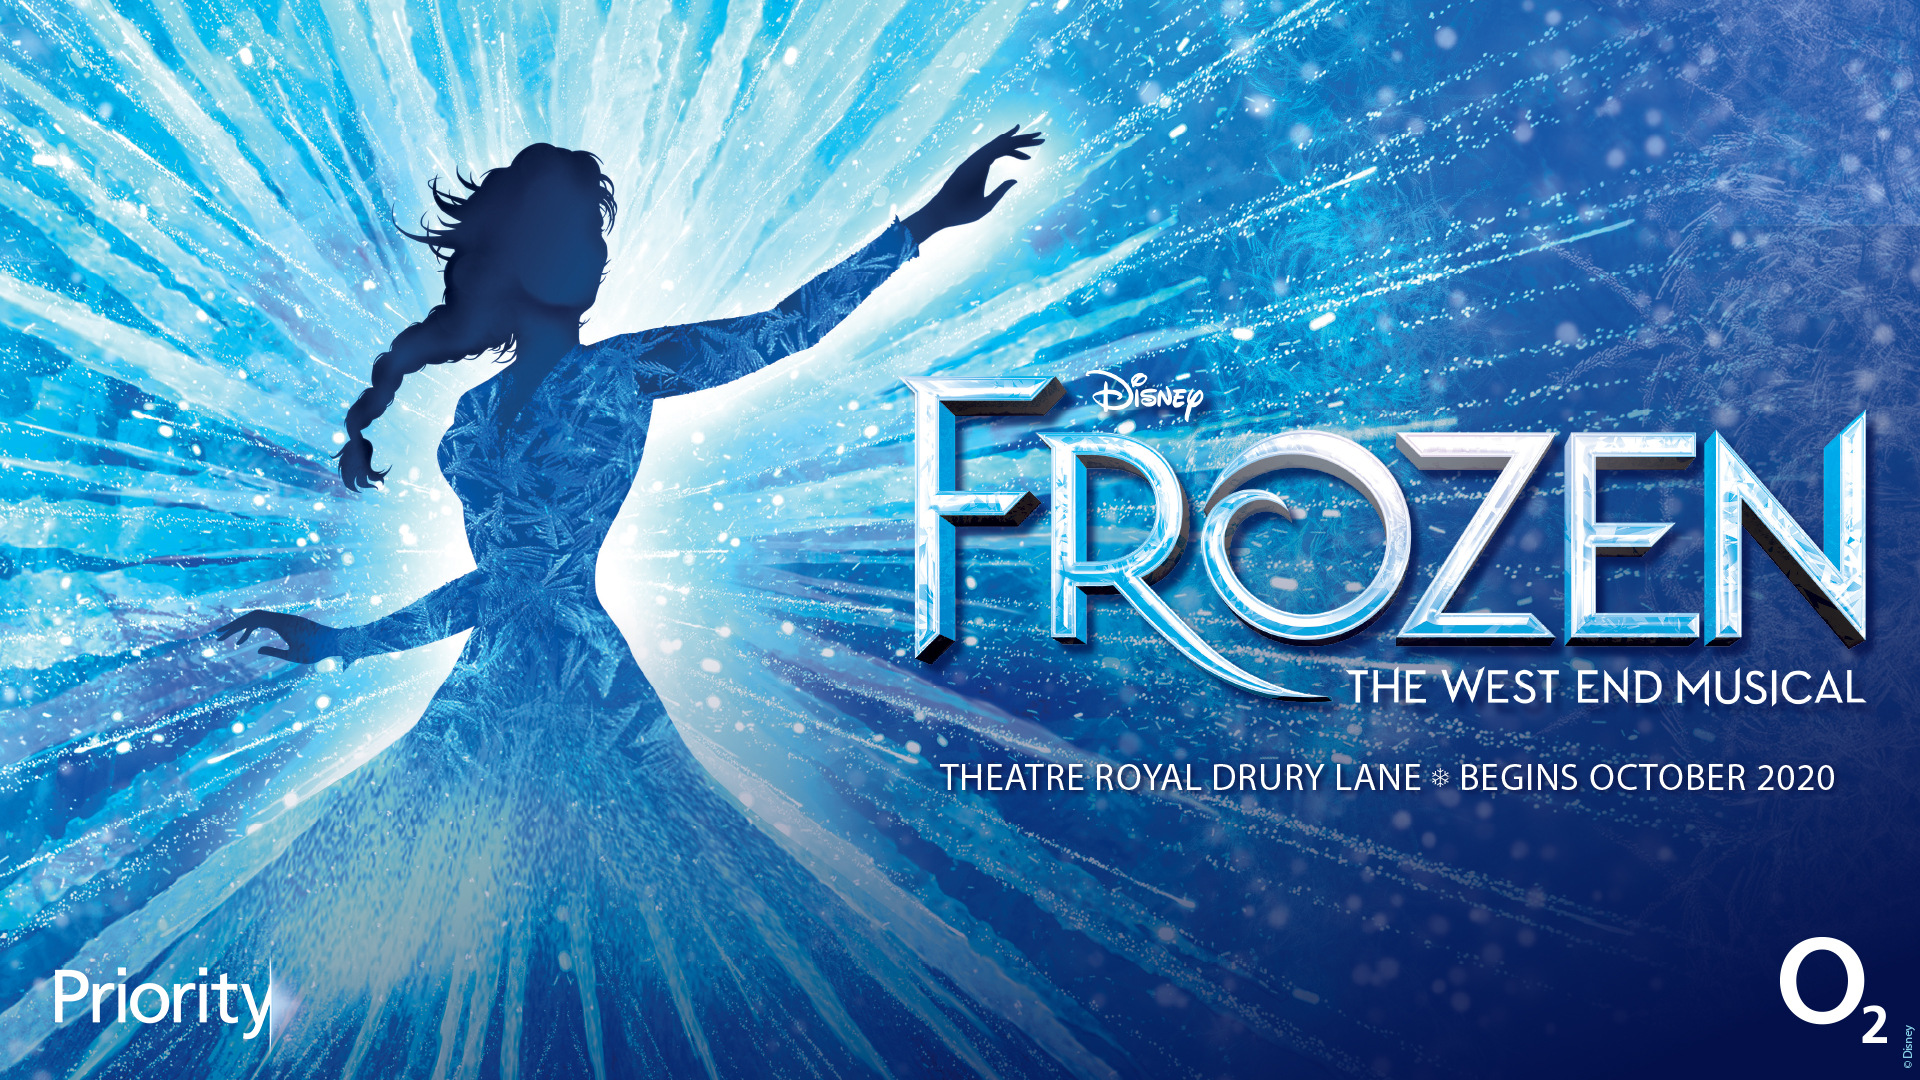 Frozen The Musical pre-sale tickets available exclusively for O2 customers via Priority from Monday